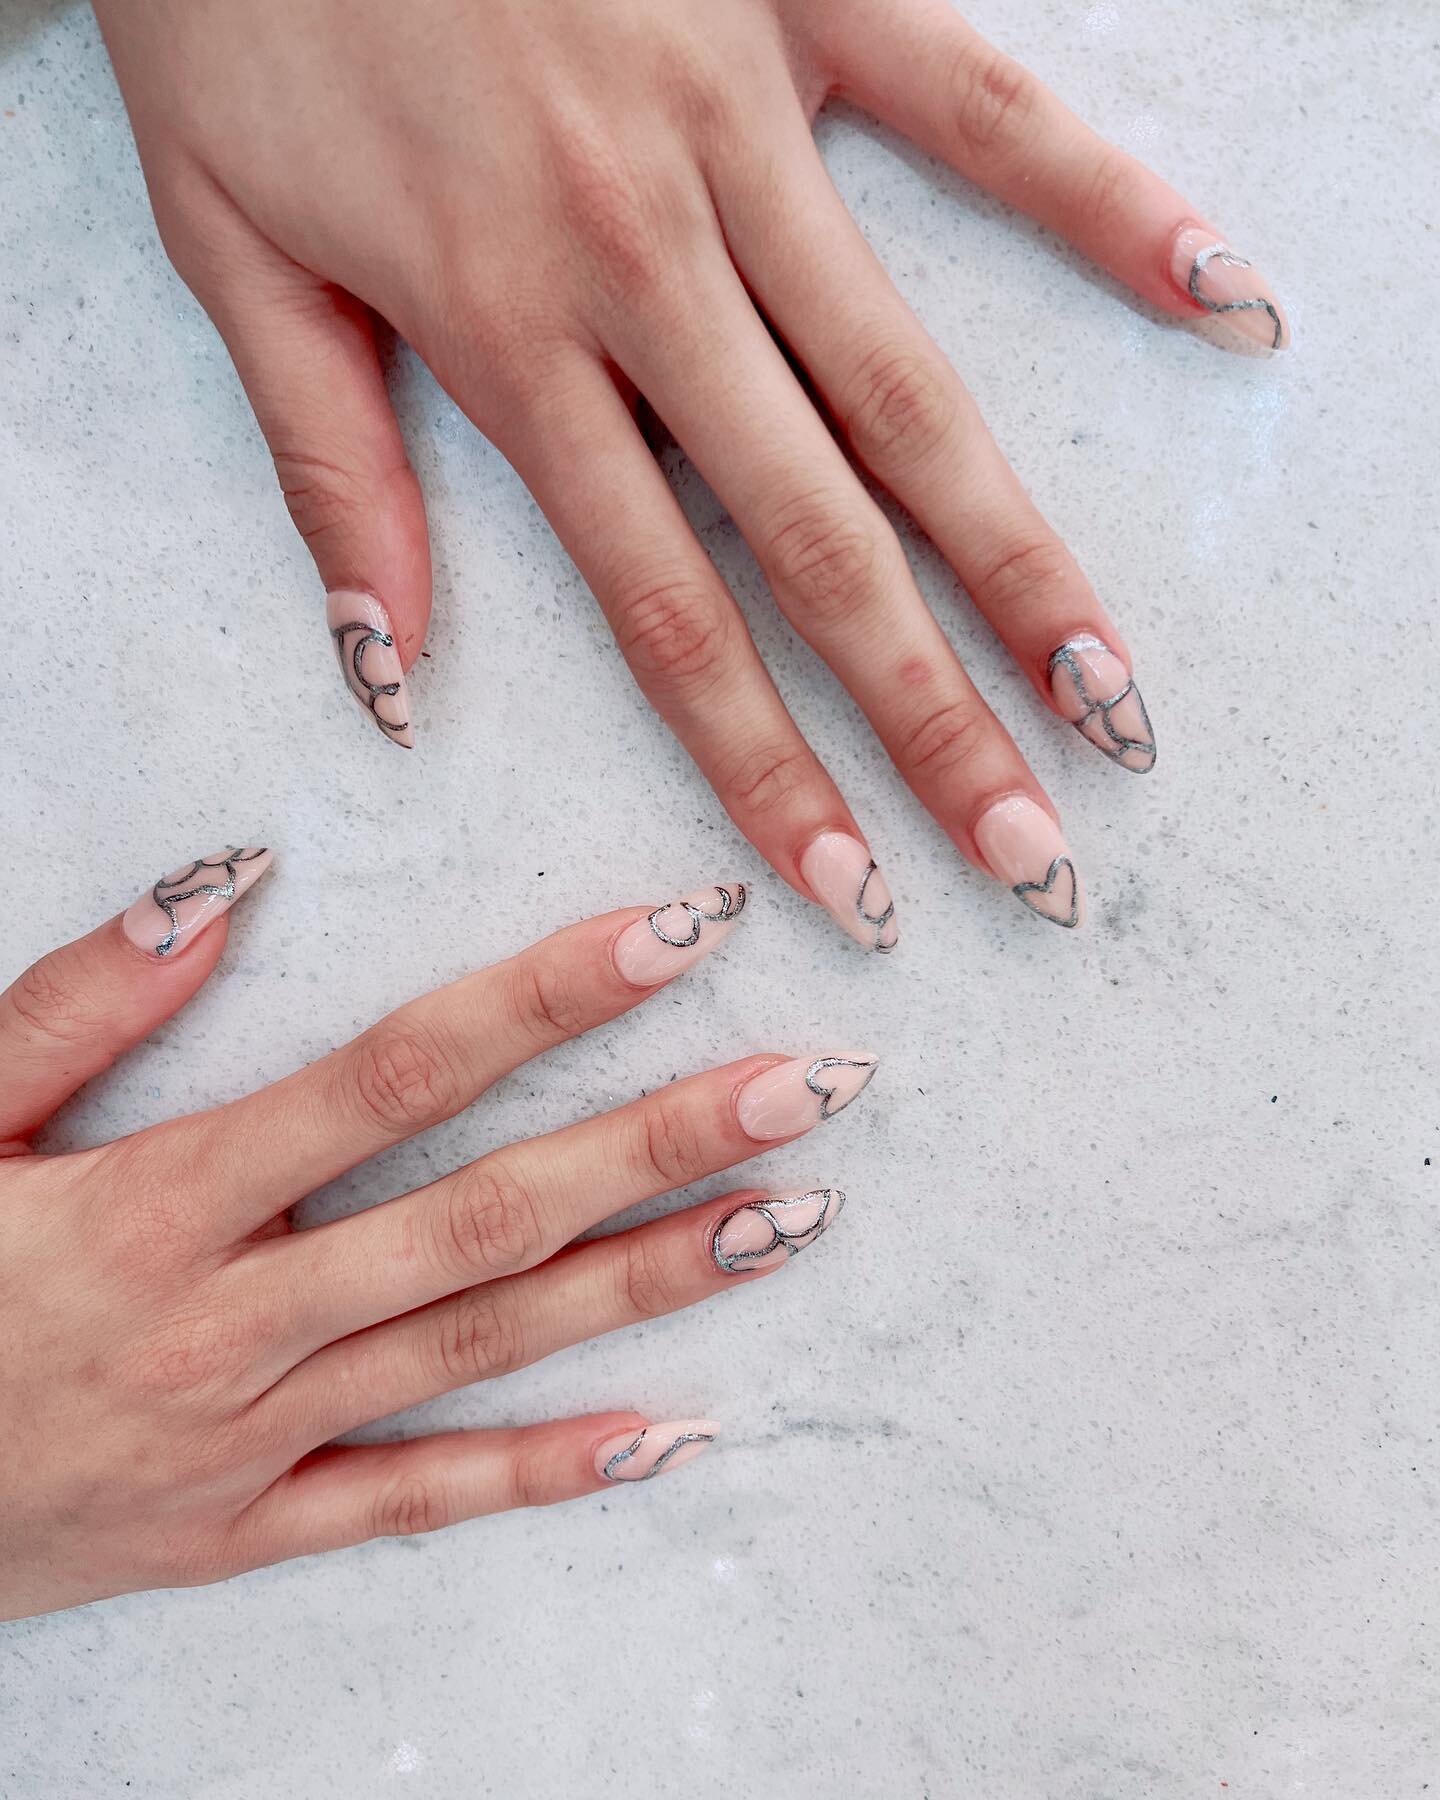 There&rsquo;s nothing a fresh manicure can&rsquo;t fix! 

#blumnailbar #metallicnails #nails #nailart #trendynailsalon #nailsofinstagram #manicure #naildesigns #nailstyles #athensga #trendynails #opi #chisel #dnd #zblend #beauty